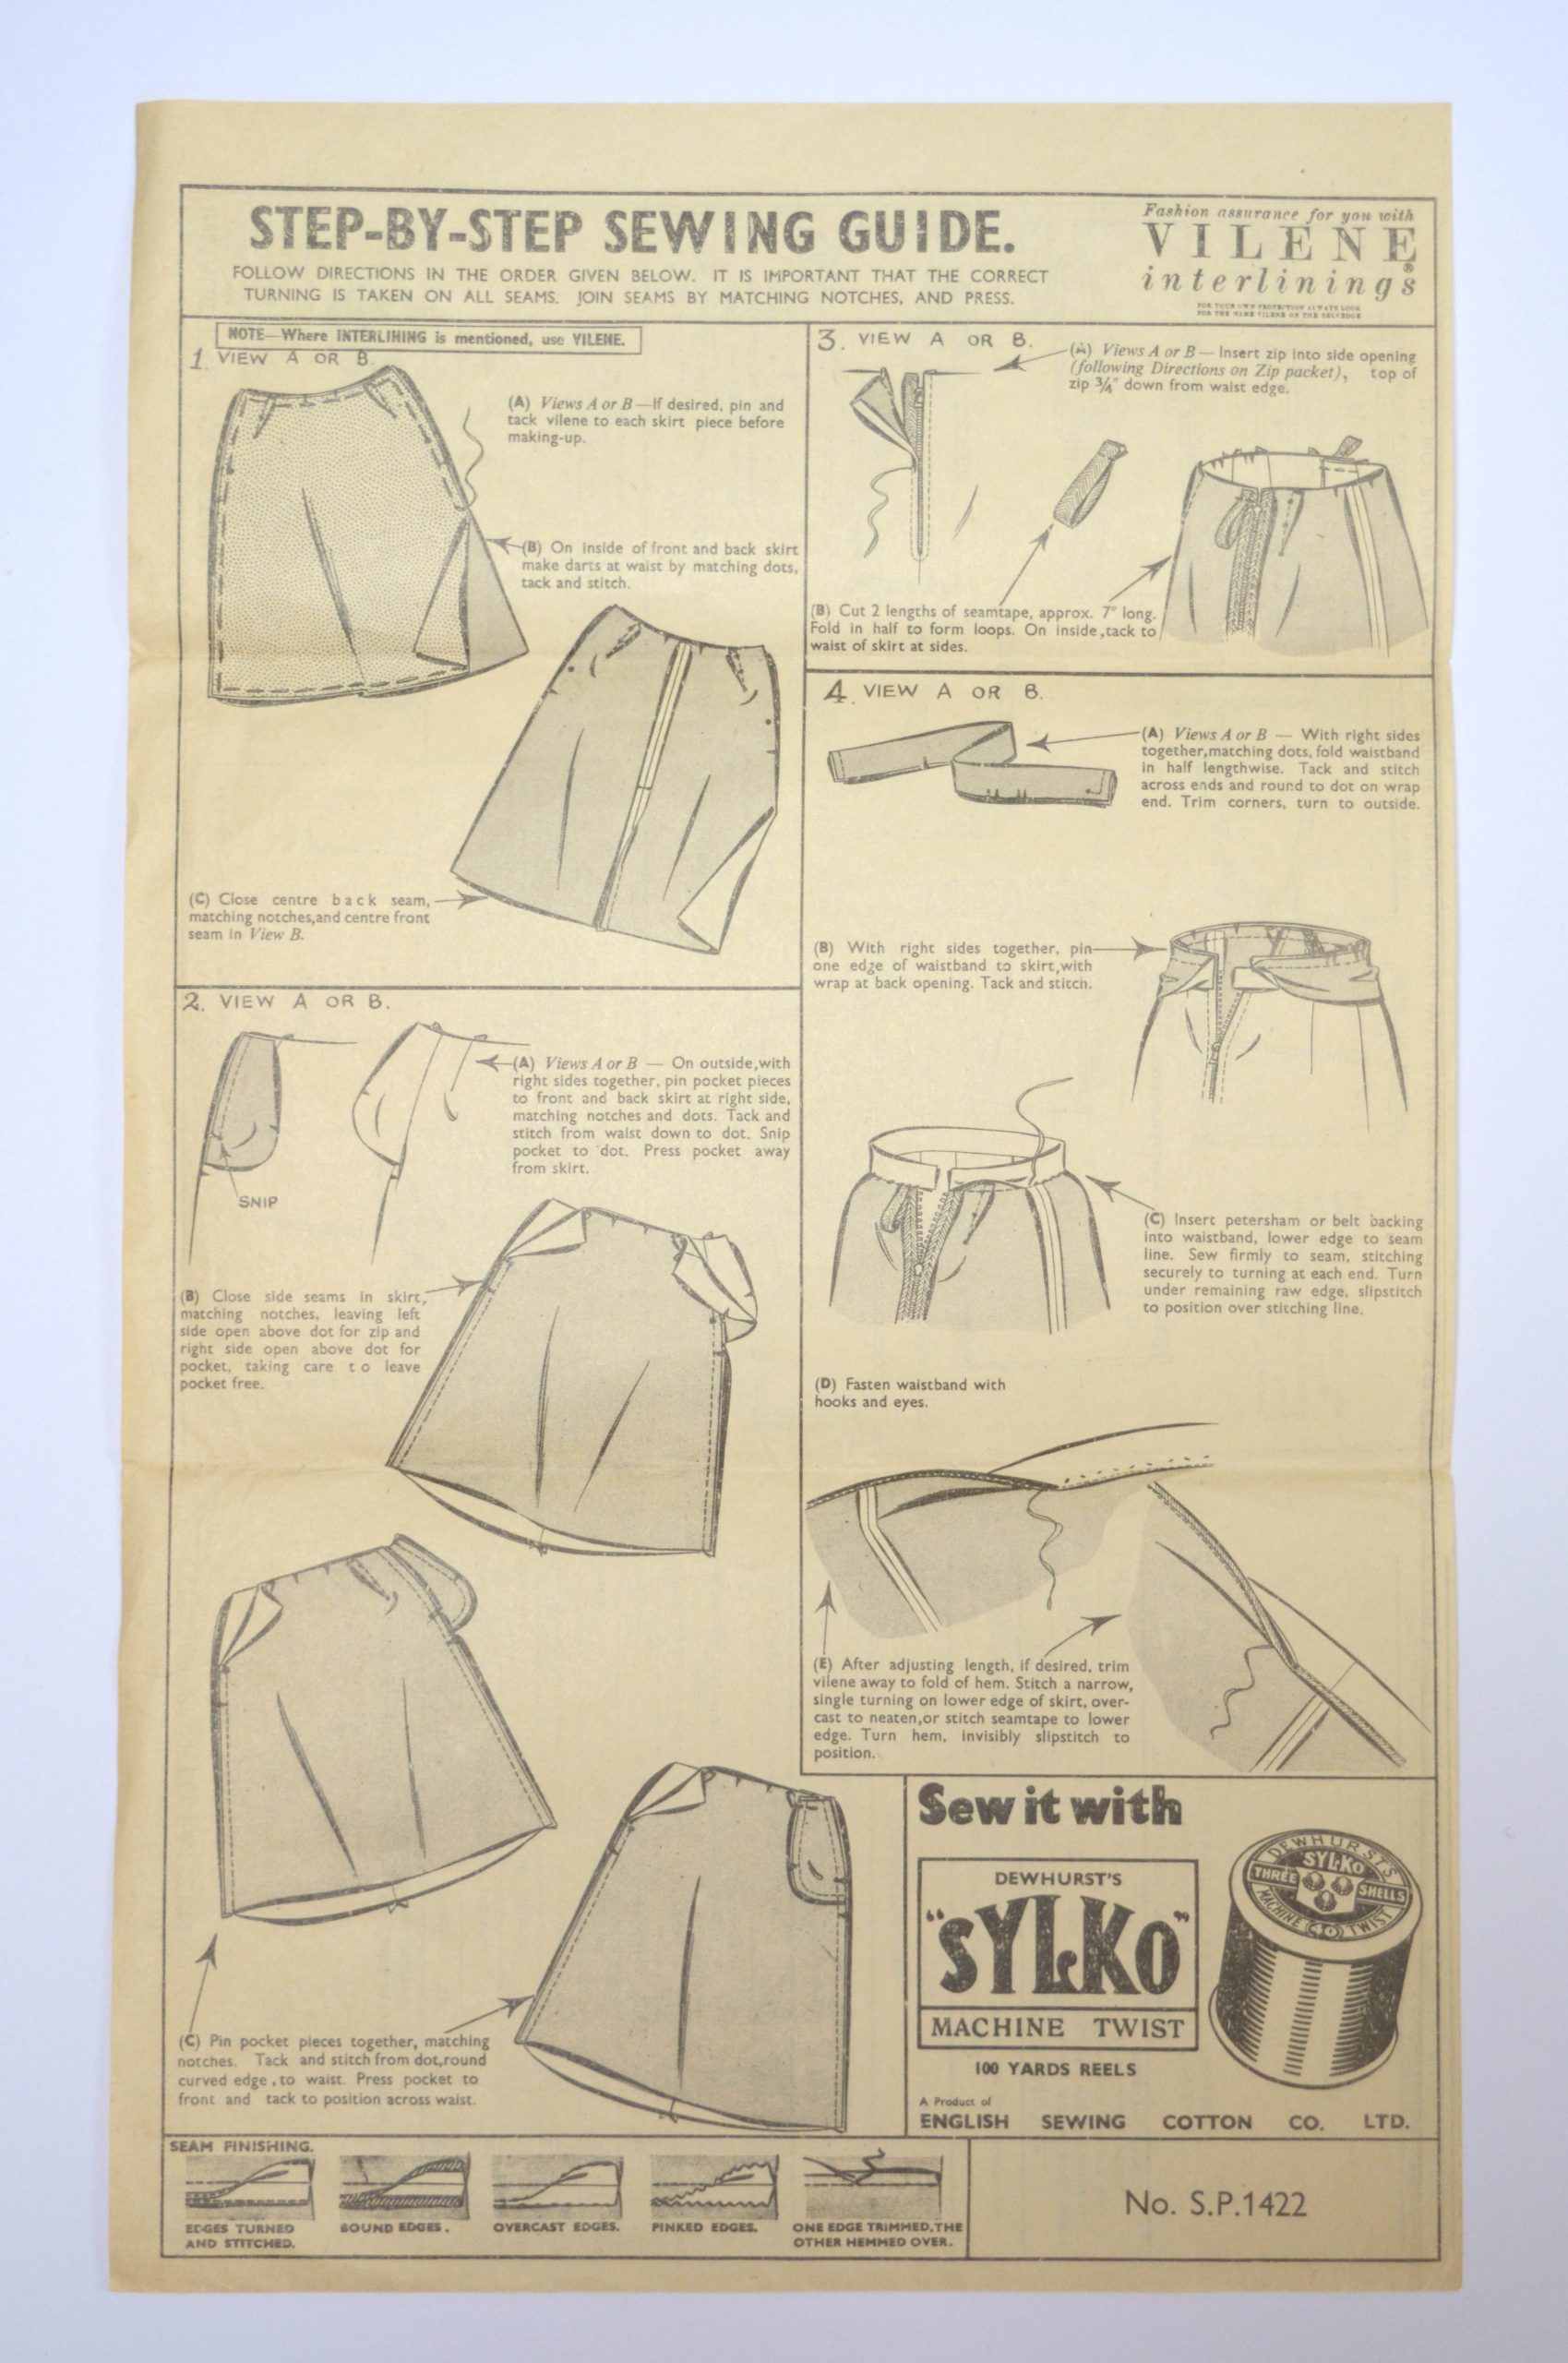 Vintage Clothing Zipper Guide  Vintage outfits, Vintage guide, Vintage  sewing notions